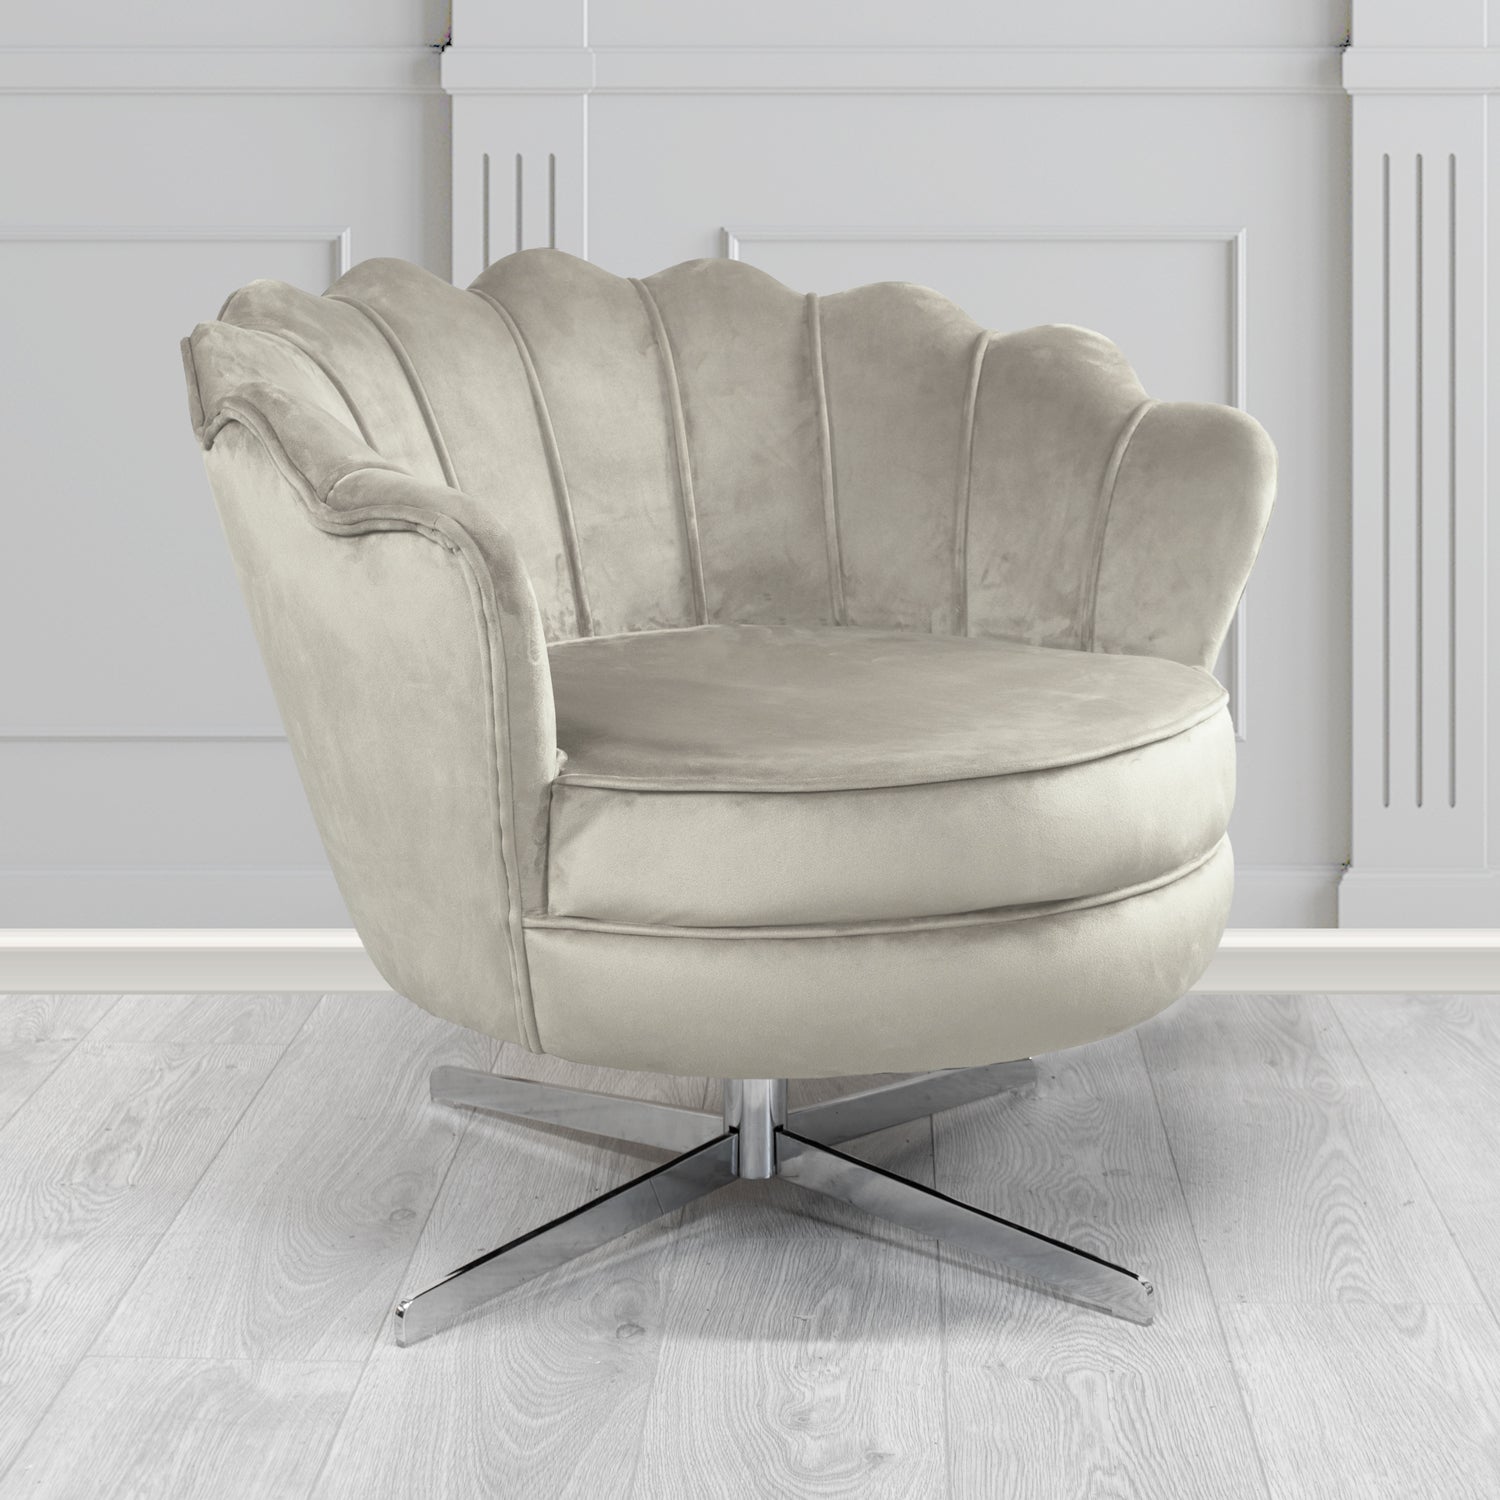 Olivia Passione Silver PAS2699 Velvet Fabric Shell Swivel Tub Chair (4681160523818)